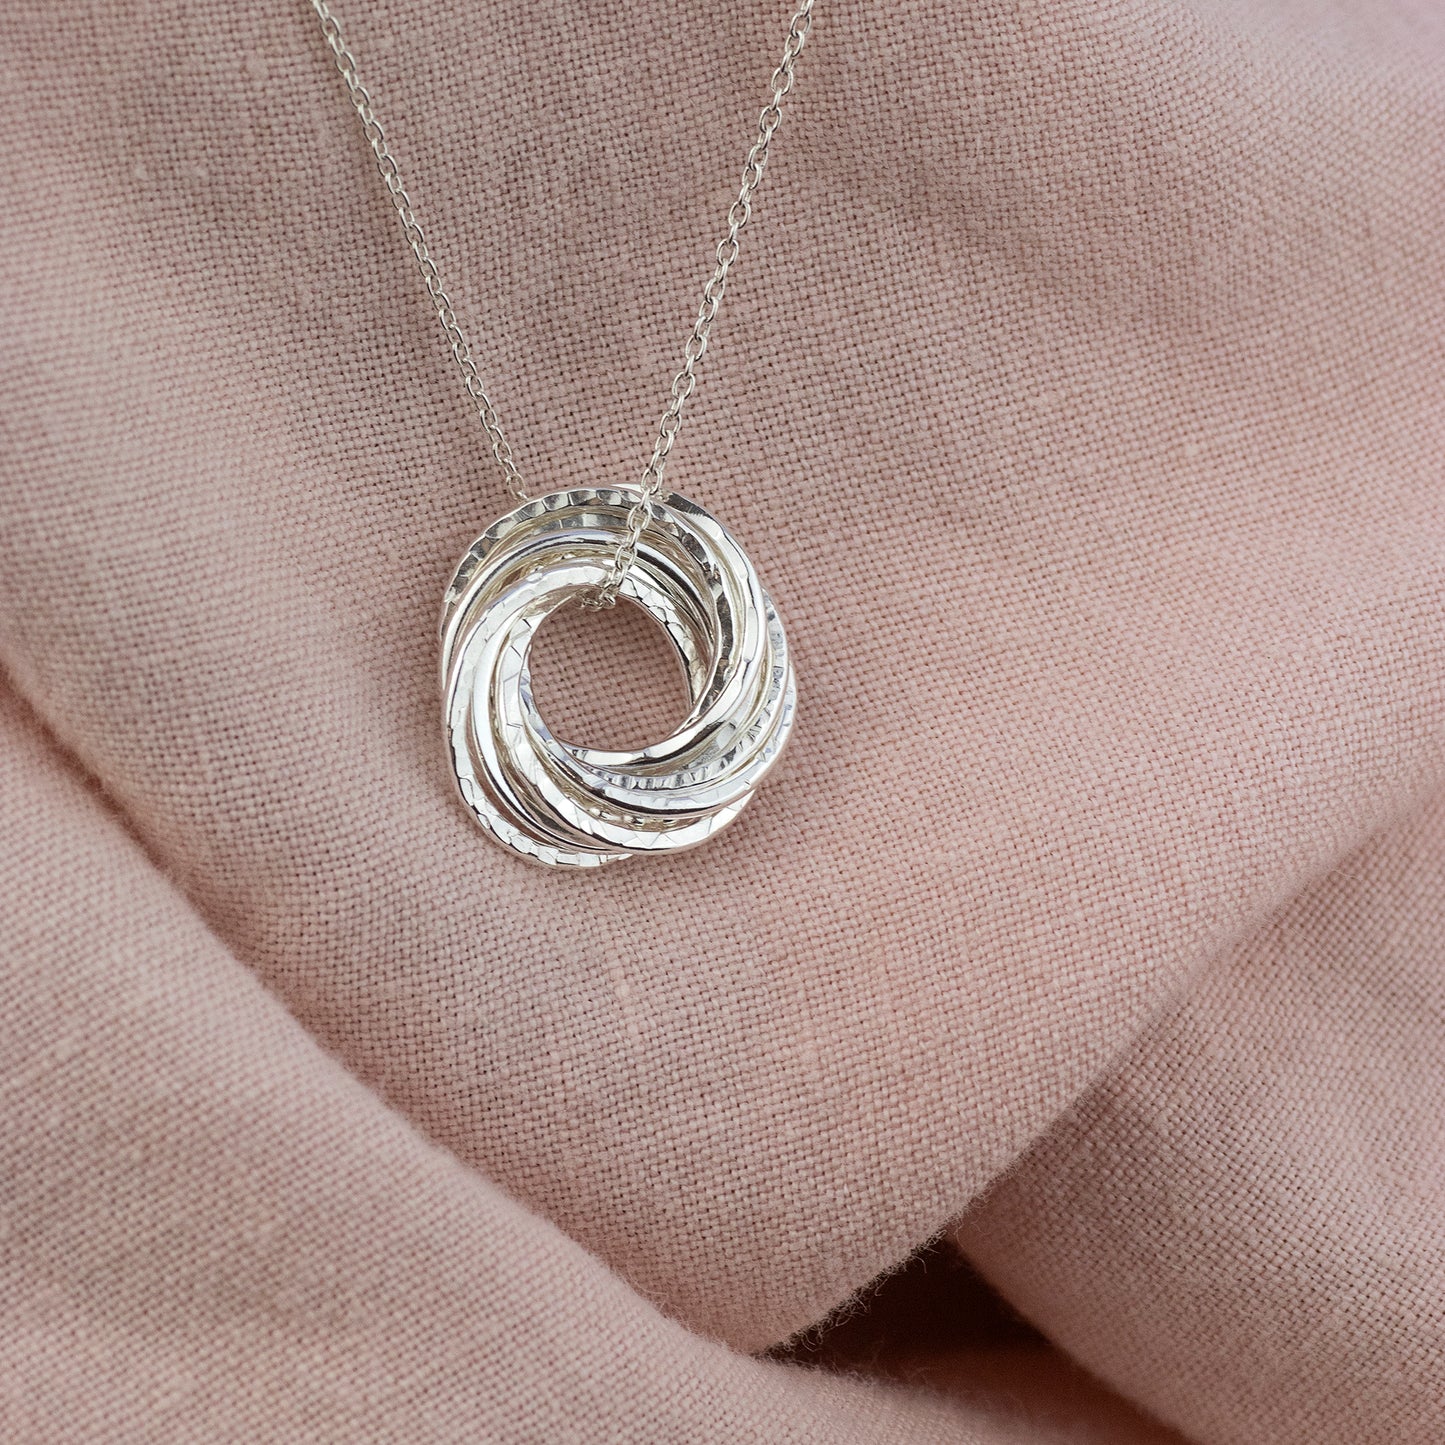 10th Anniversary Necklace - The Original 10 Rings for 10 Years Necklace -  Petite Silver